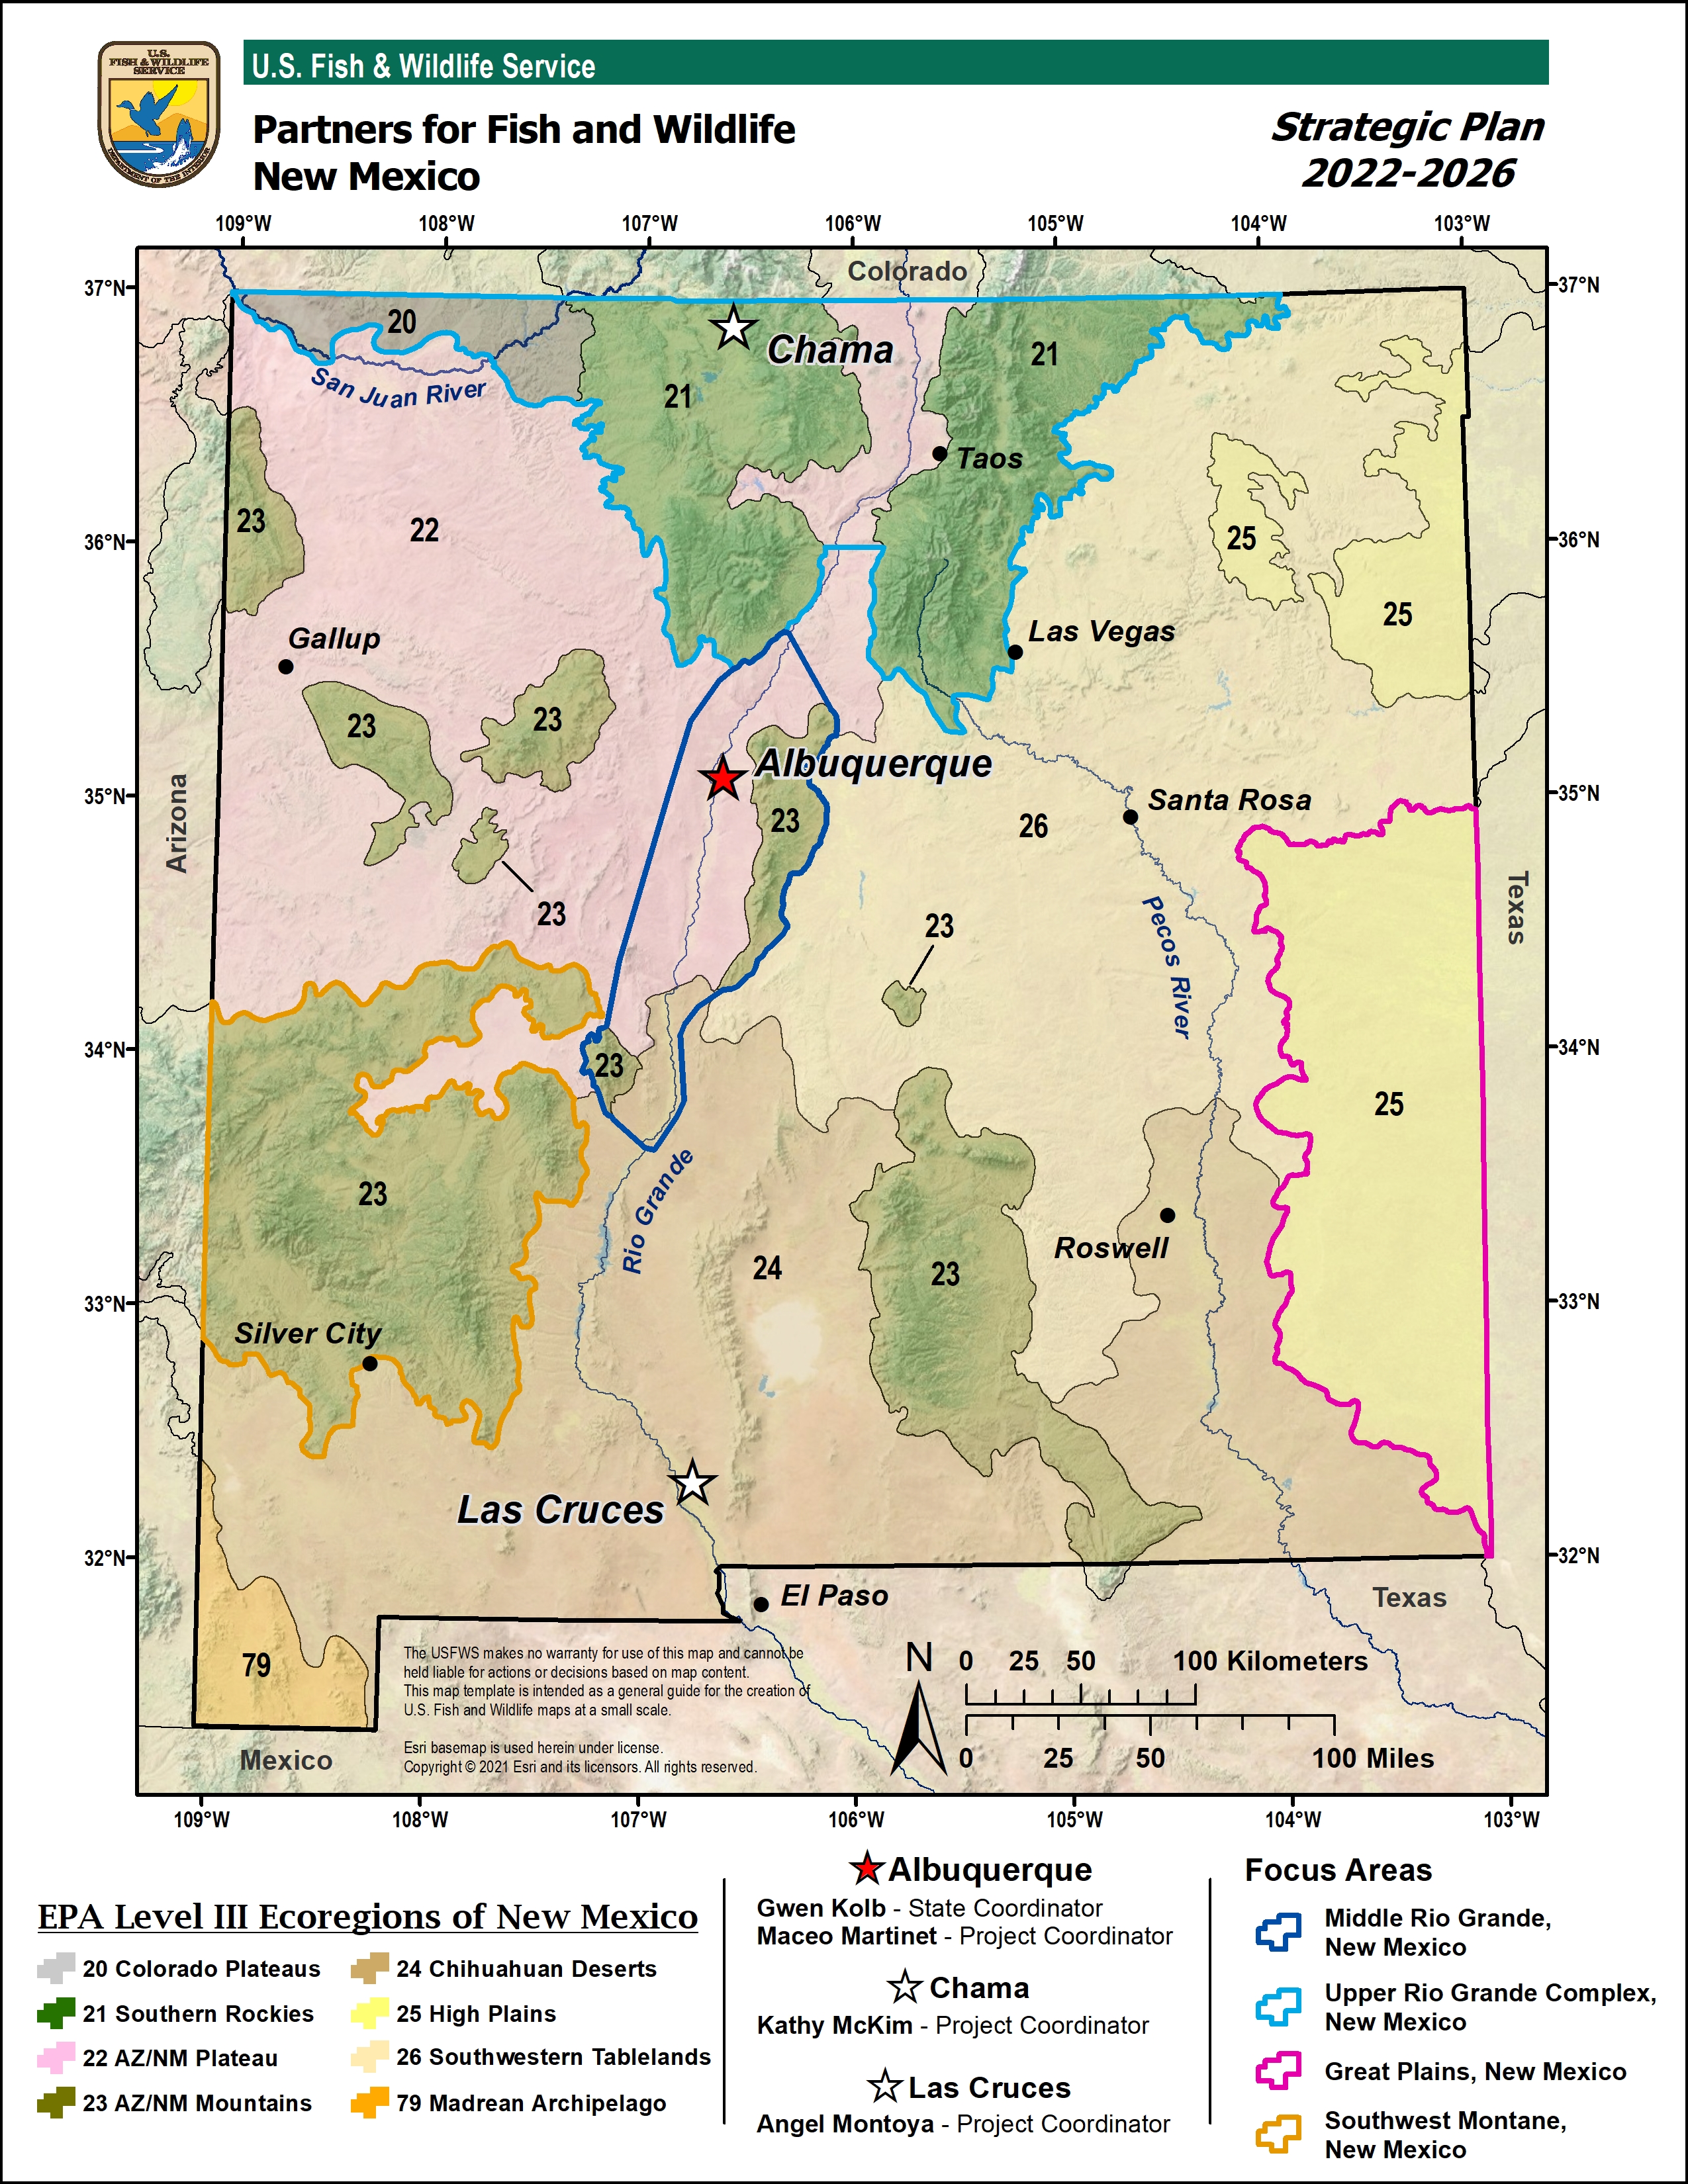 Map Focal Areas for the Partners for Fish and Wildlife Program in New Mexico, highlighting the middle rio grande, upper rio grande, great plains and southwest montane